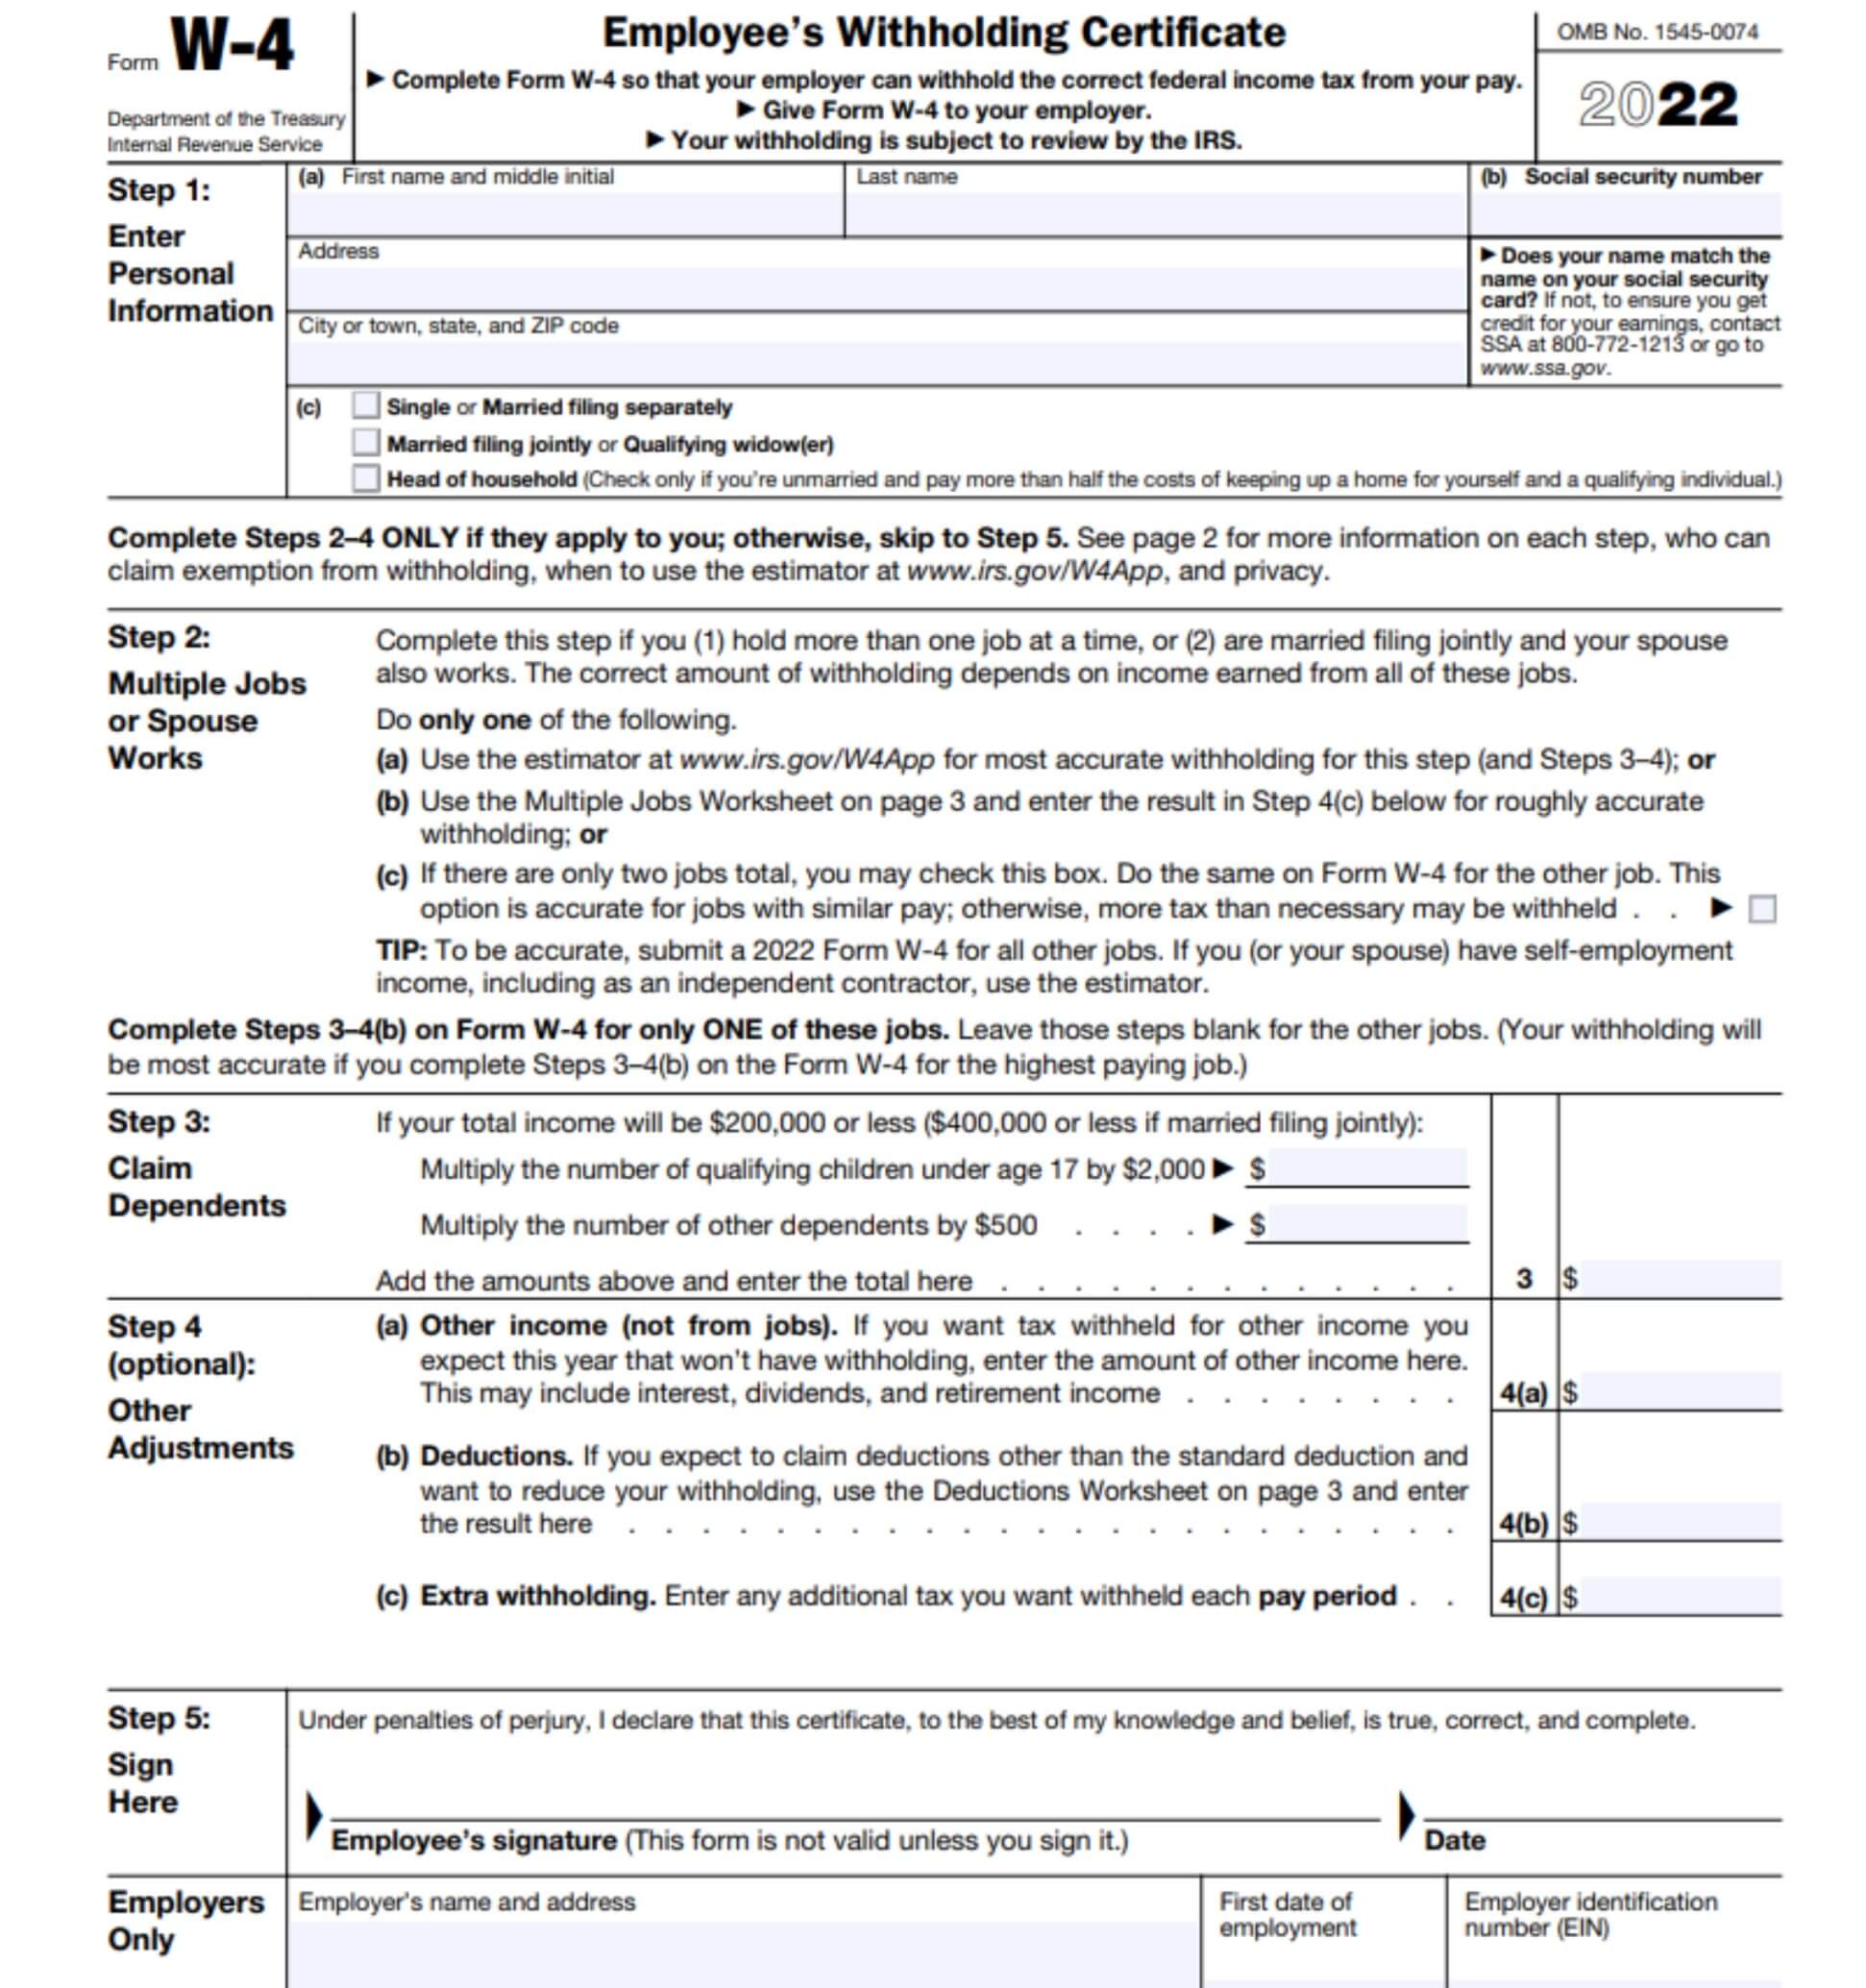 form w-4 example image